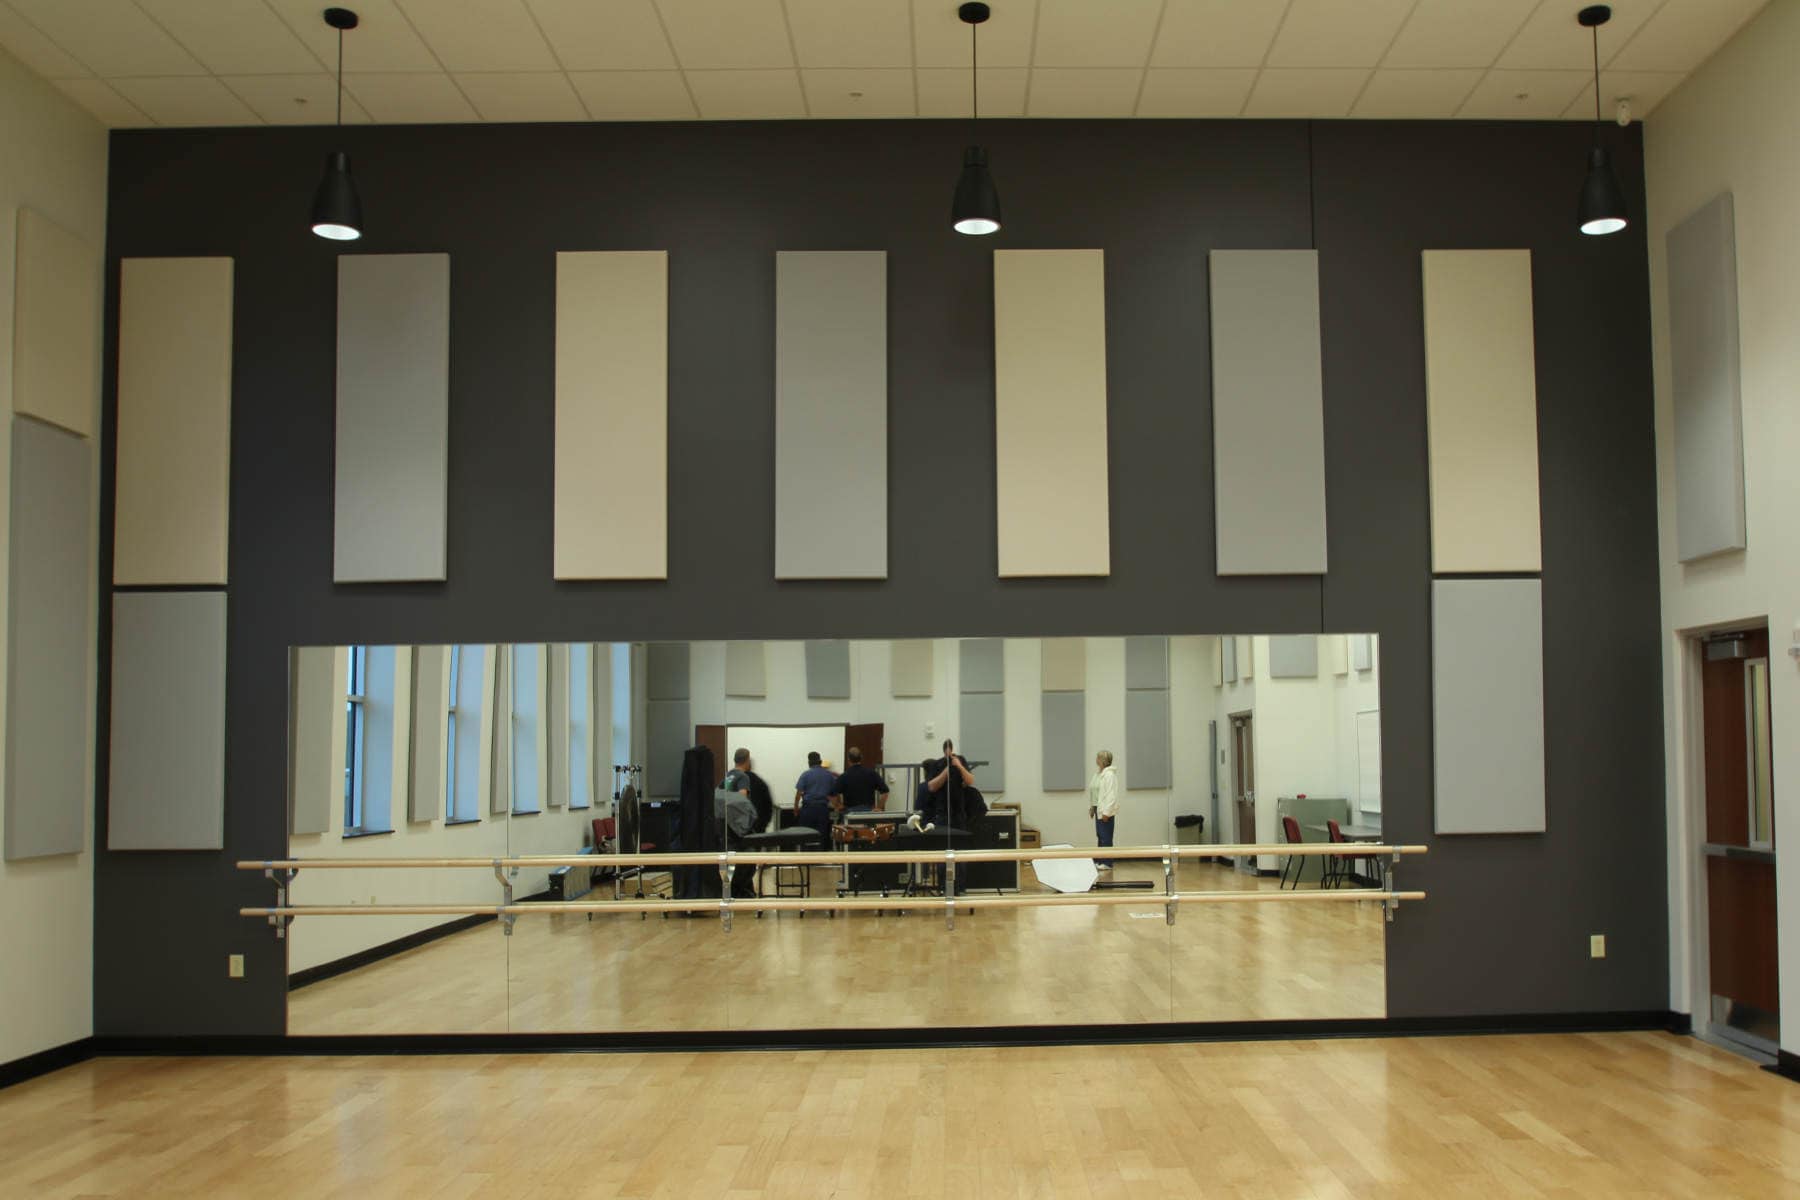 Ballet Studio with Standard Series acoustic panels